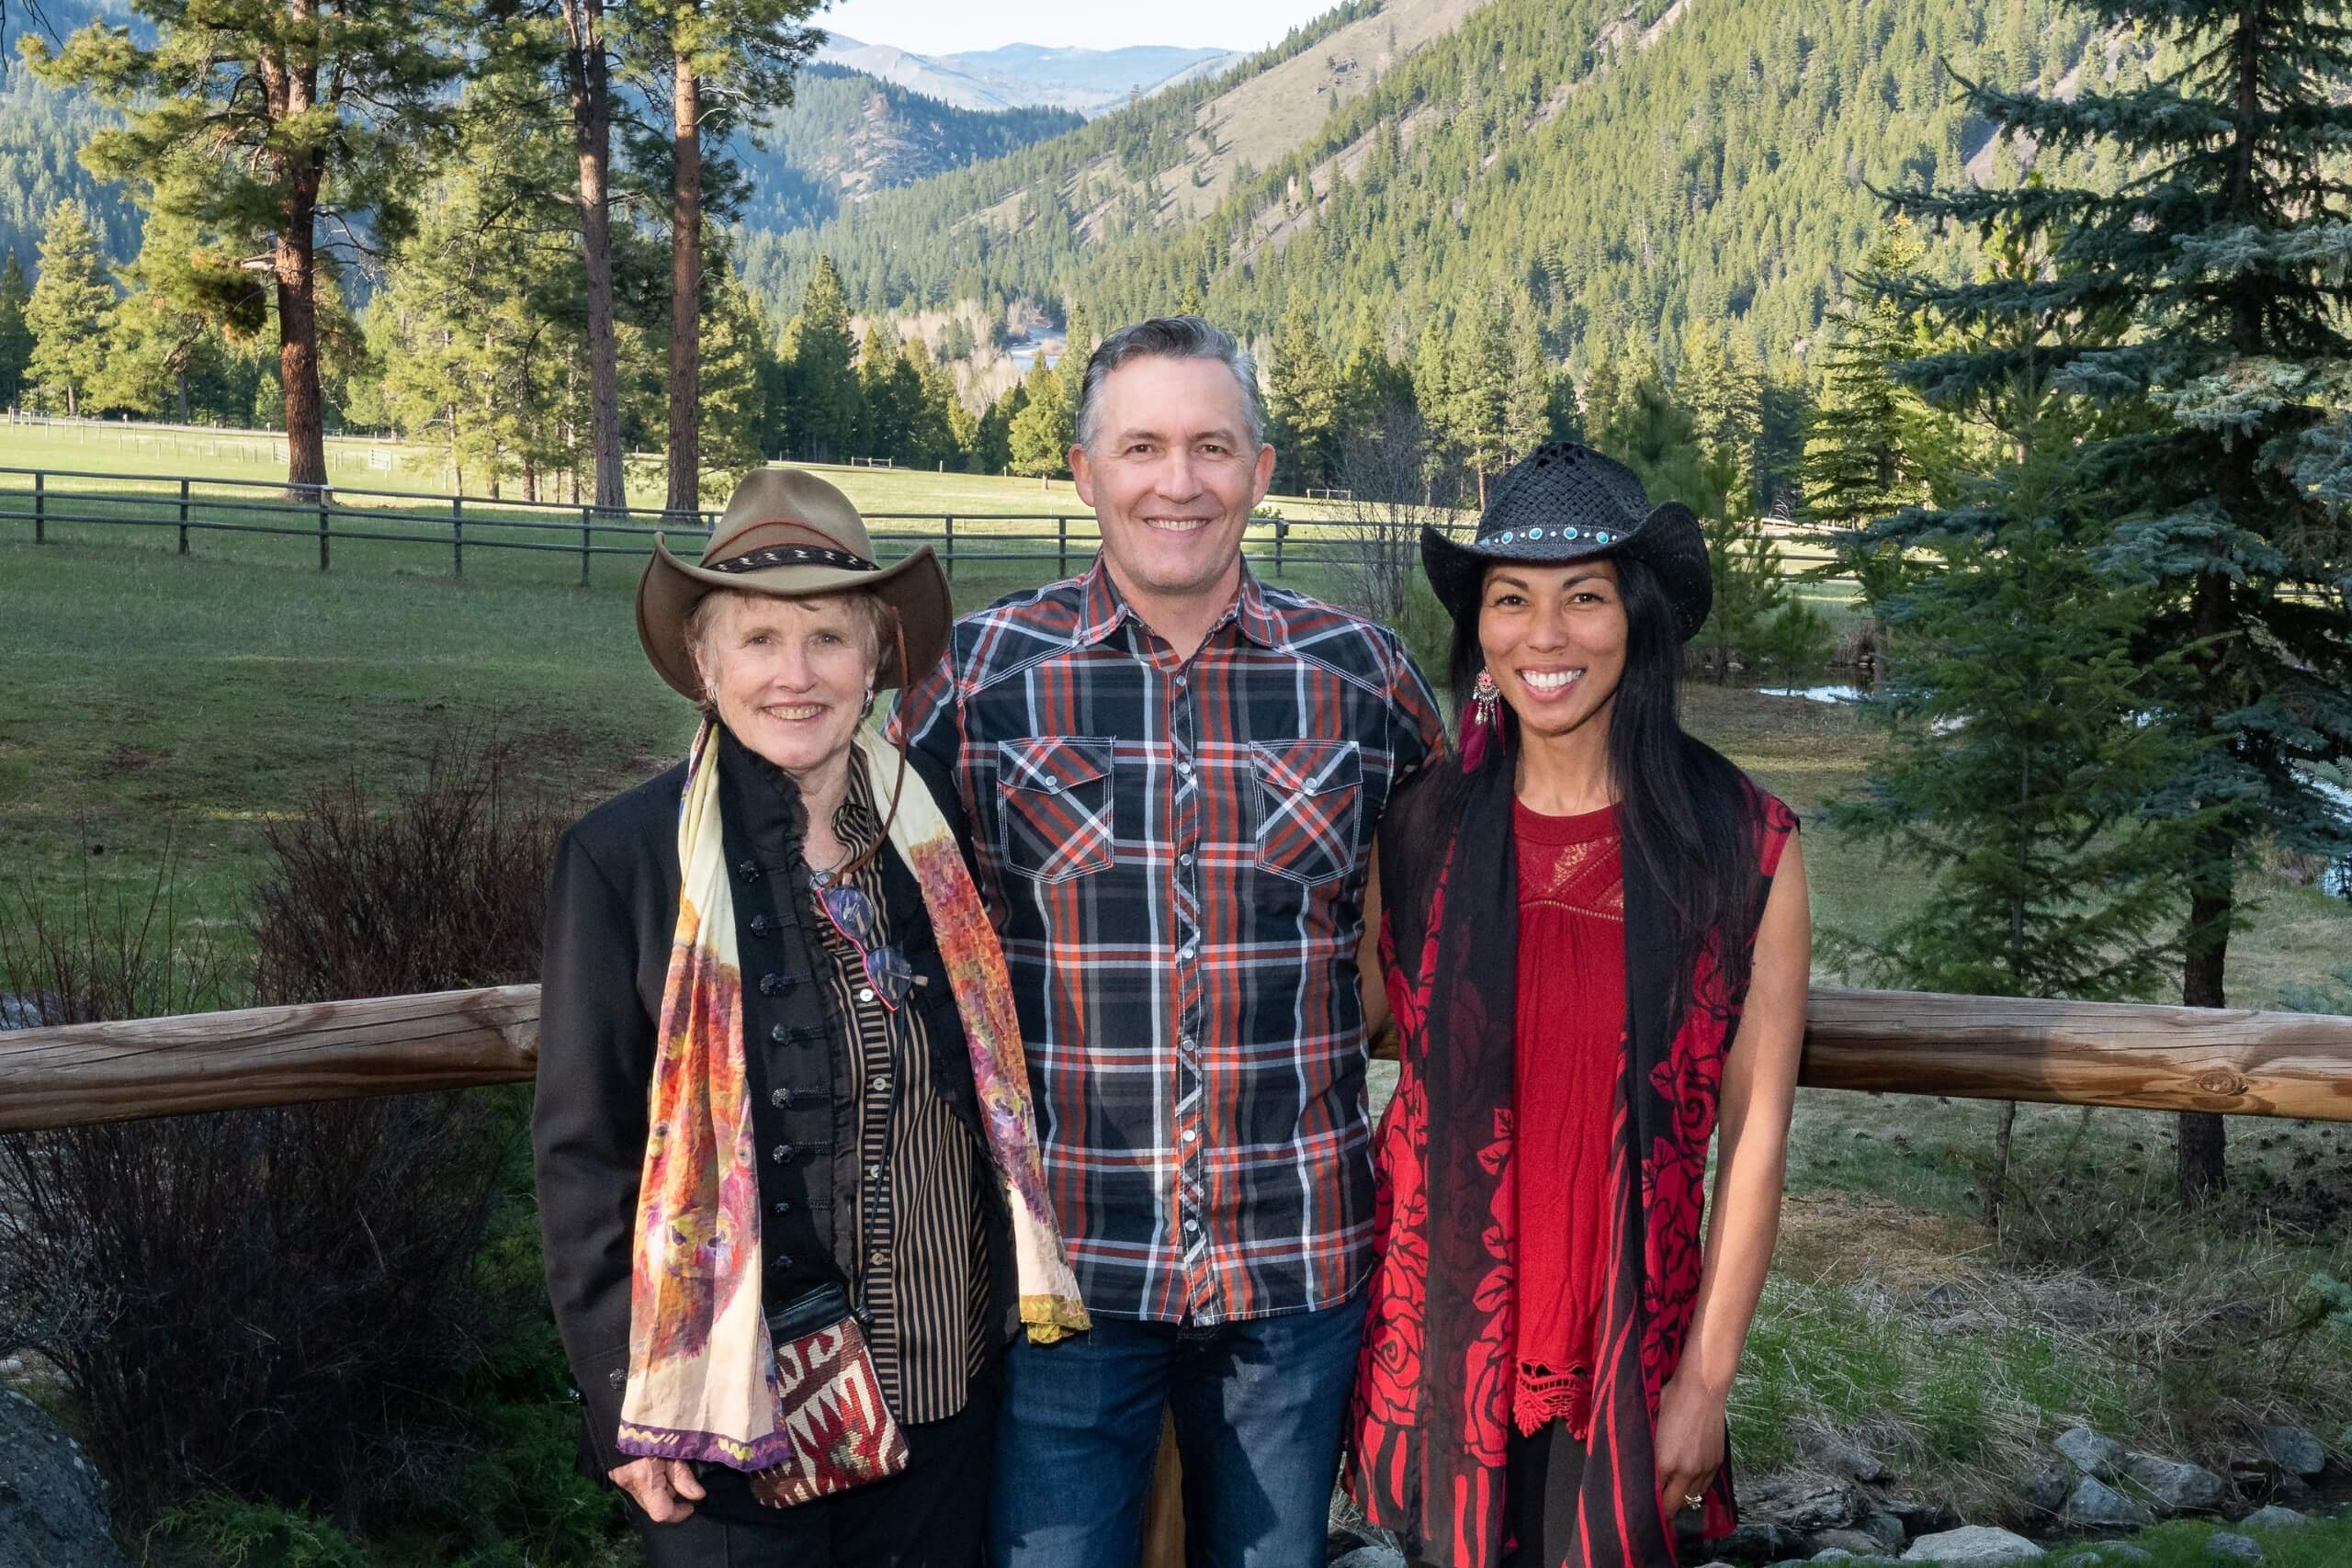 Artists Nancy Cawdrey, Jason Rich, and Brenna Kimbro standing in front of mountain landscape.